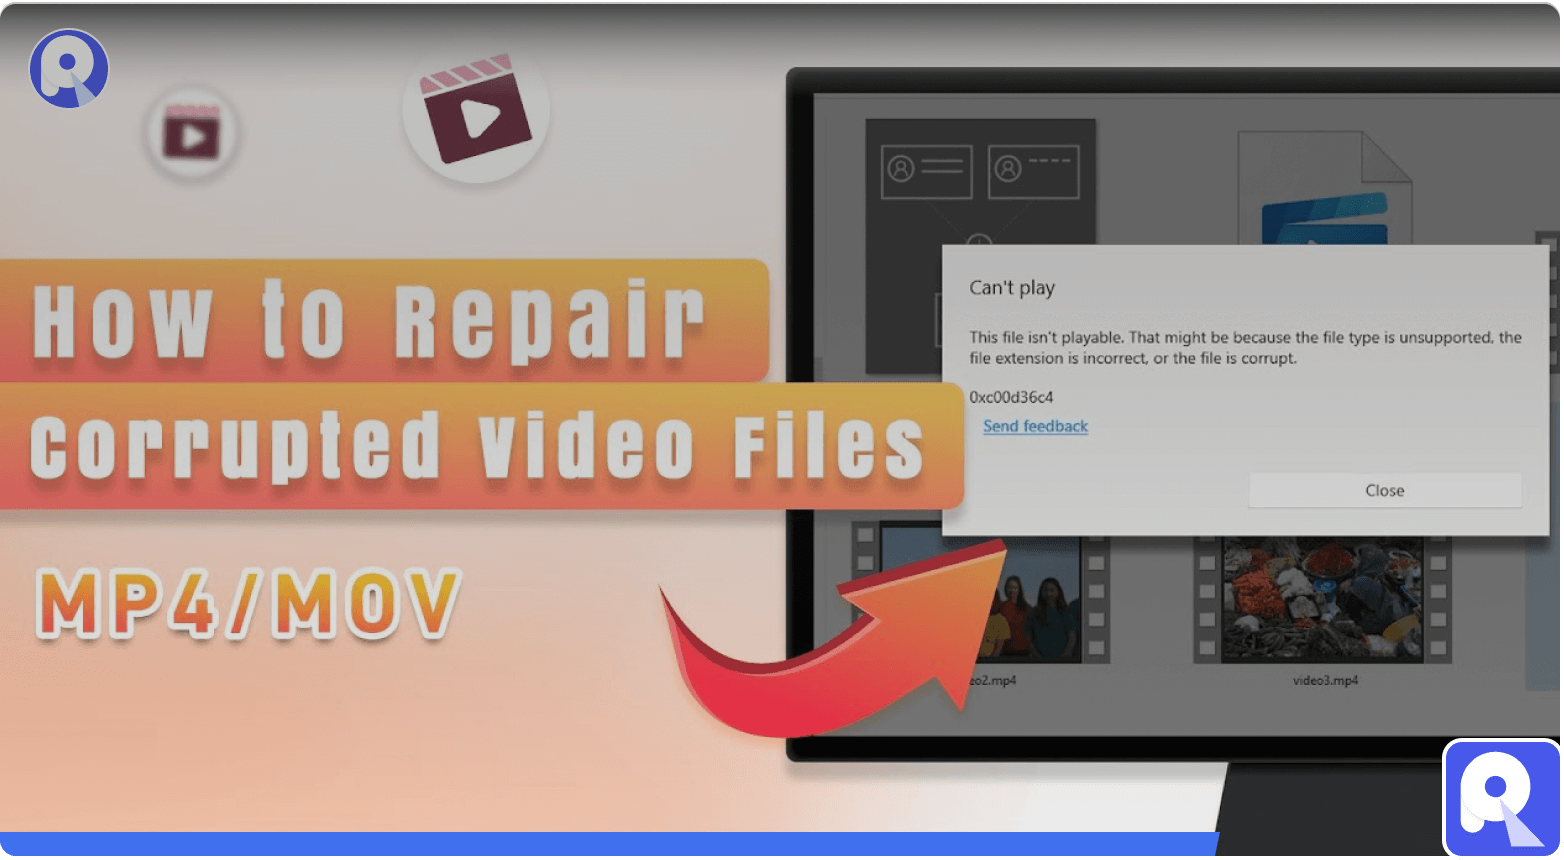 How to recover deleted/unsaved PowerPoint